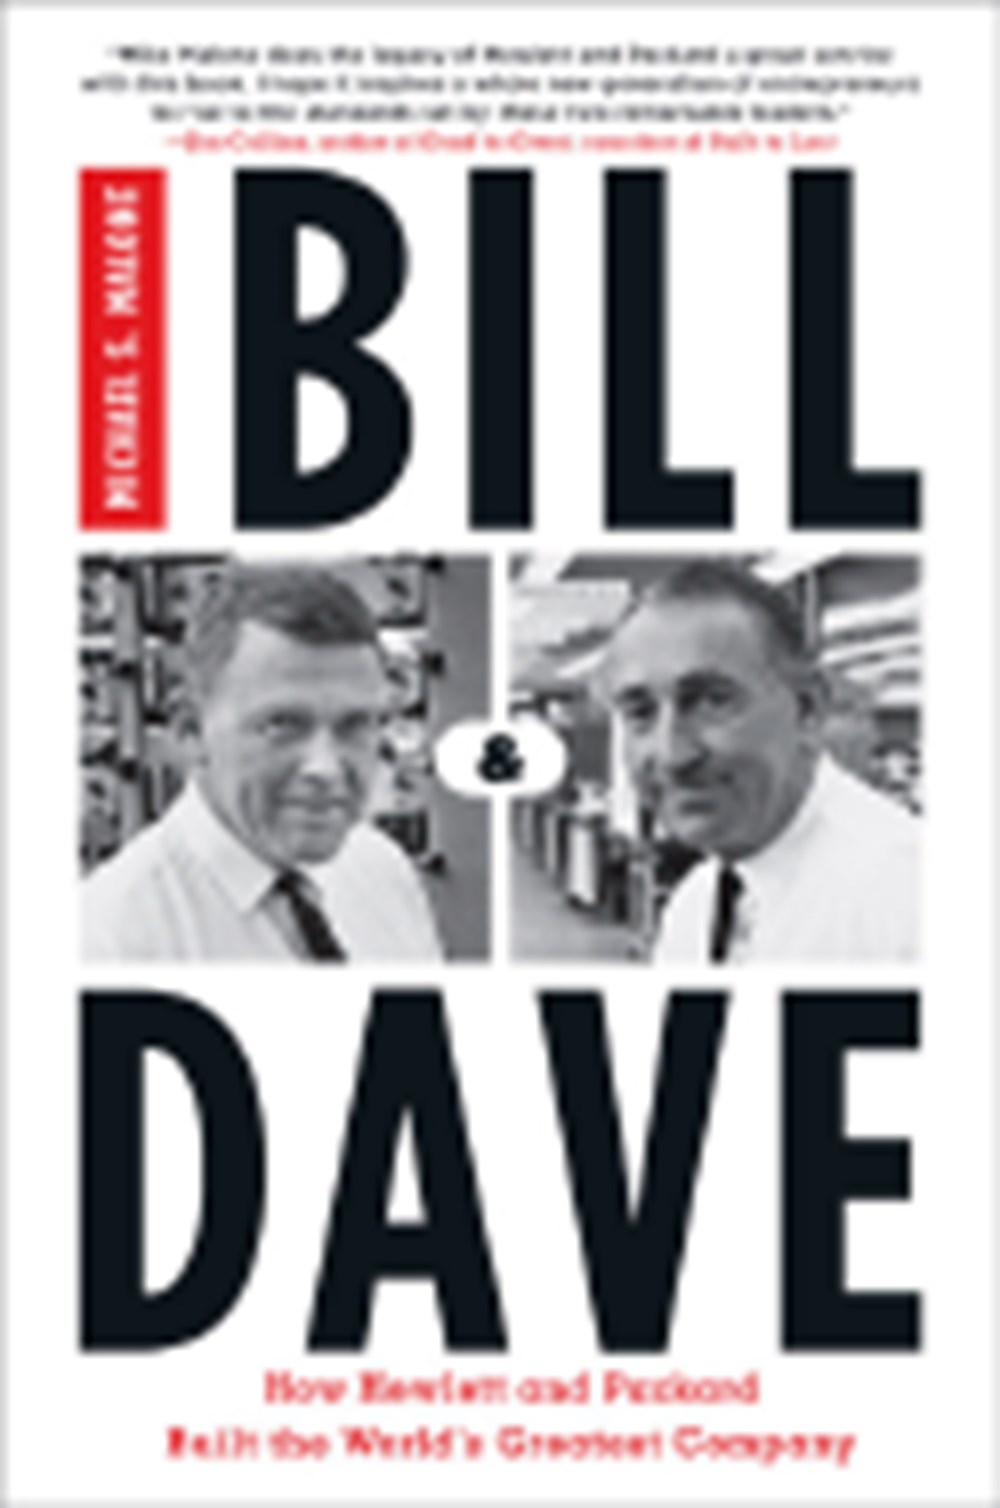 Bill & Dave: How Hewlett and Packard Built the World's Greatest Company